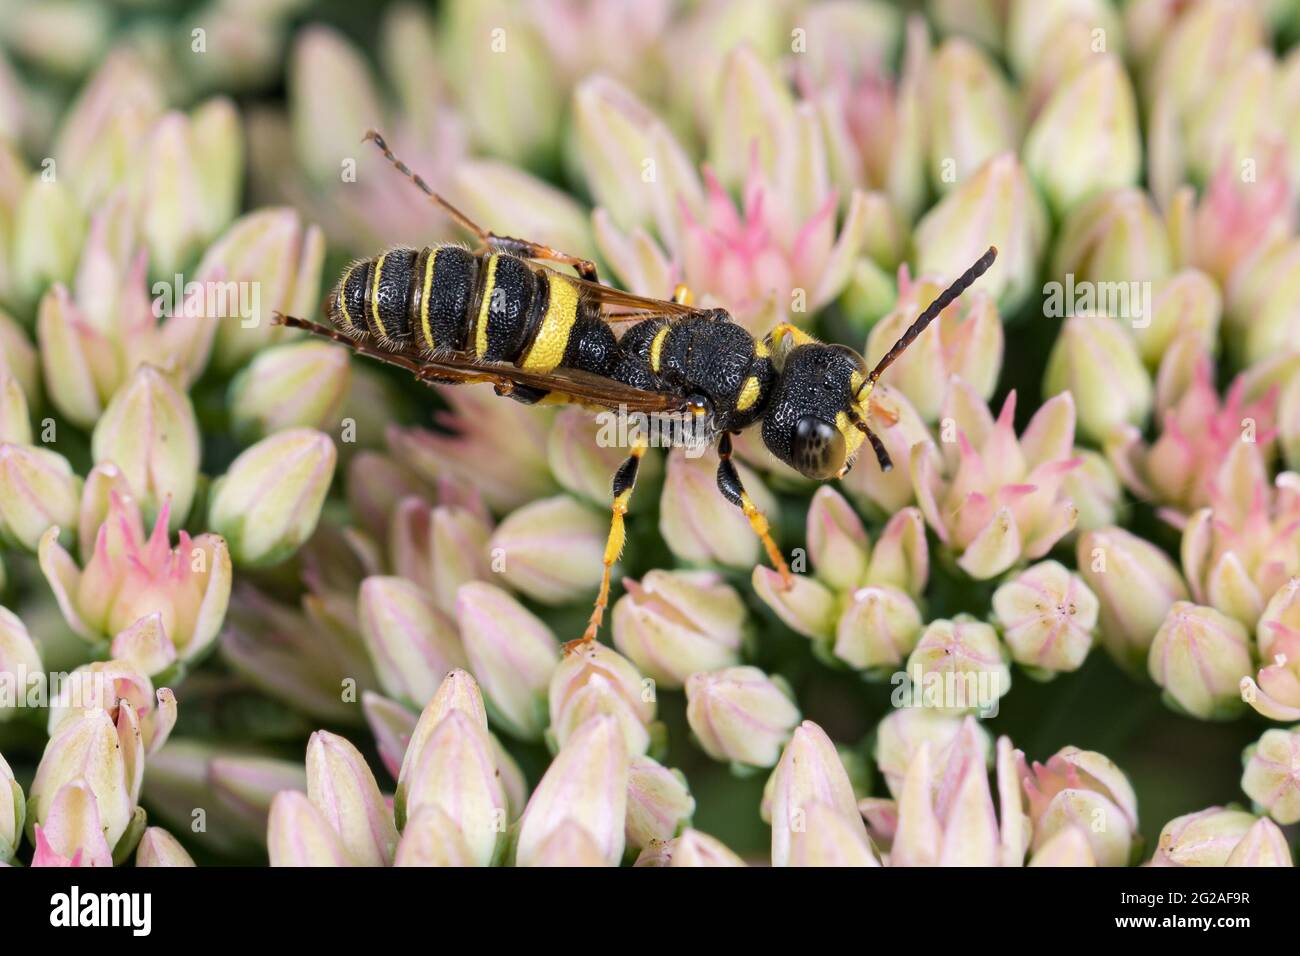 Weevil wasp feeding on nectar from Sedum plant. Concept of insect and wildlife conservation, habitat preservation, and backyard flower garden Stock Photo